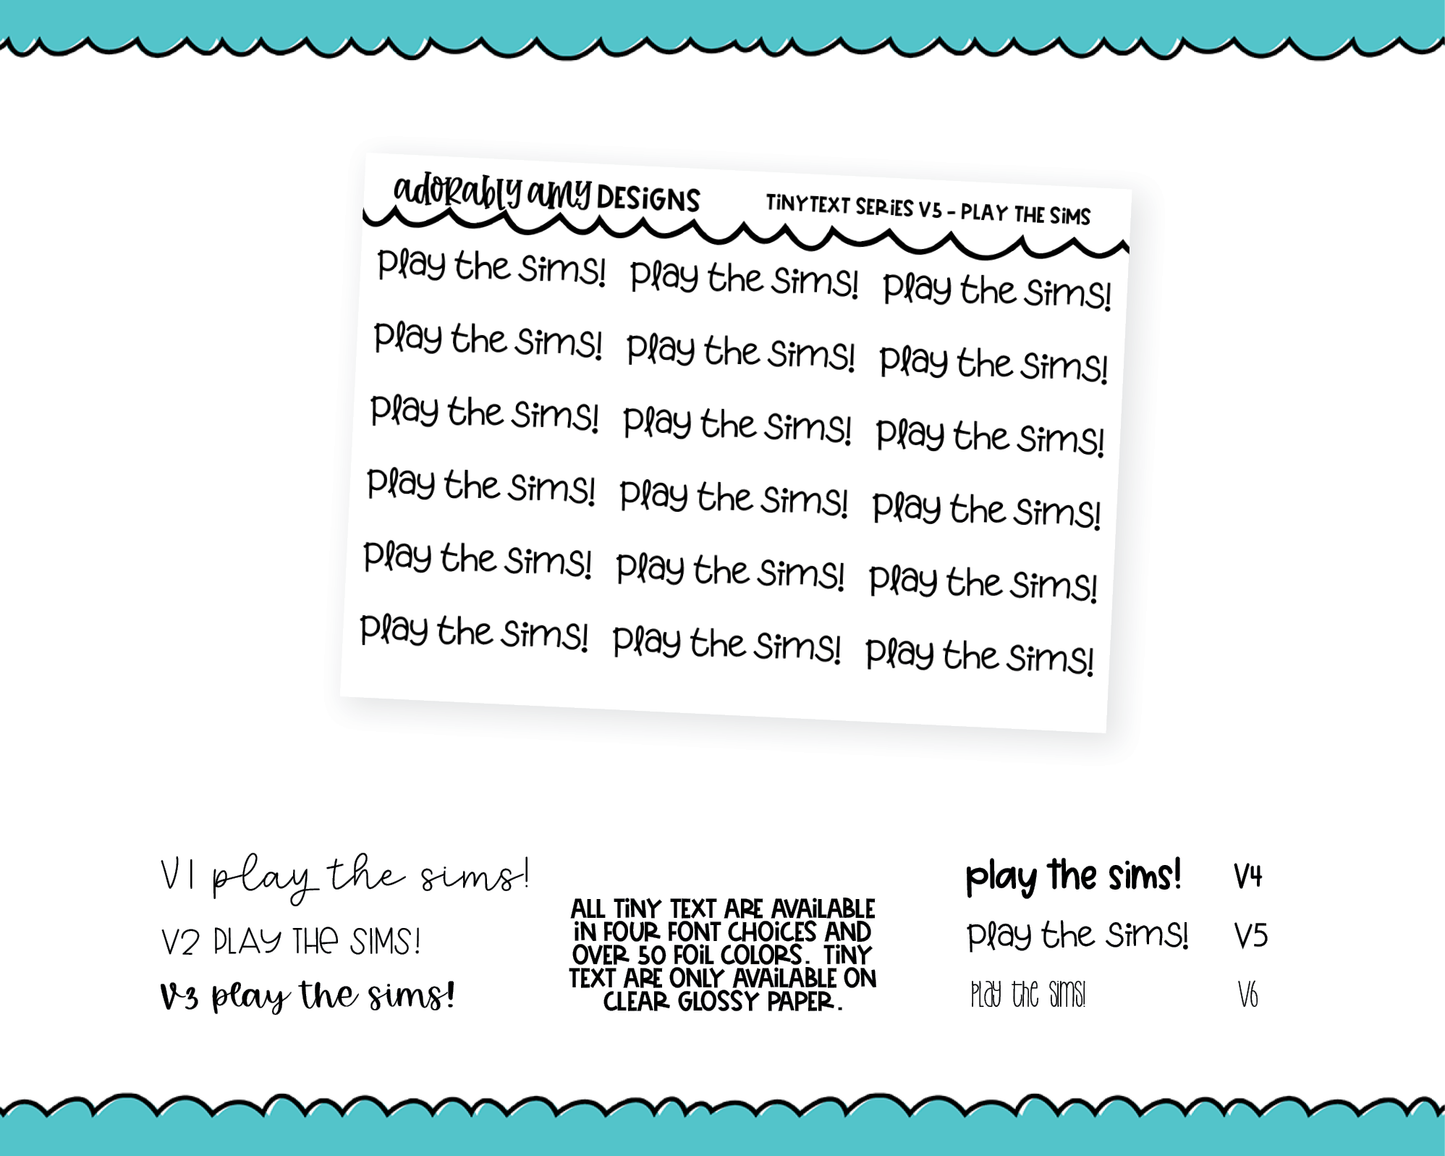 Foiled Tiny Text Series - Play the Sims Checklist Size Planner Stickers for any Planner or Insert